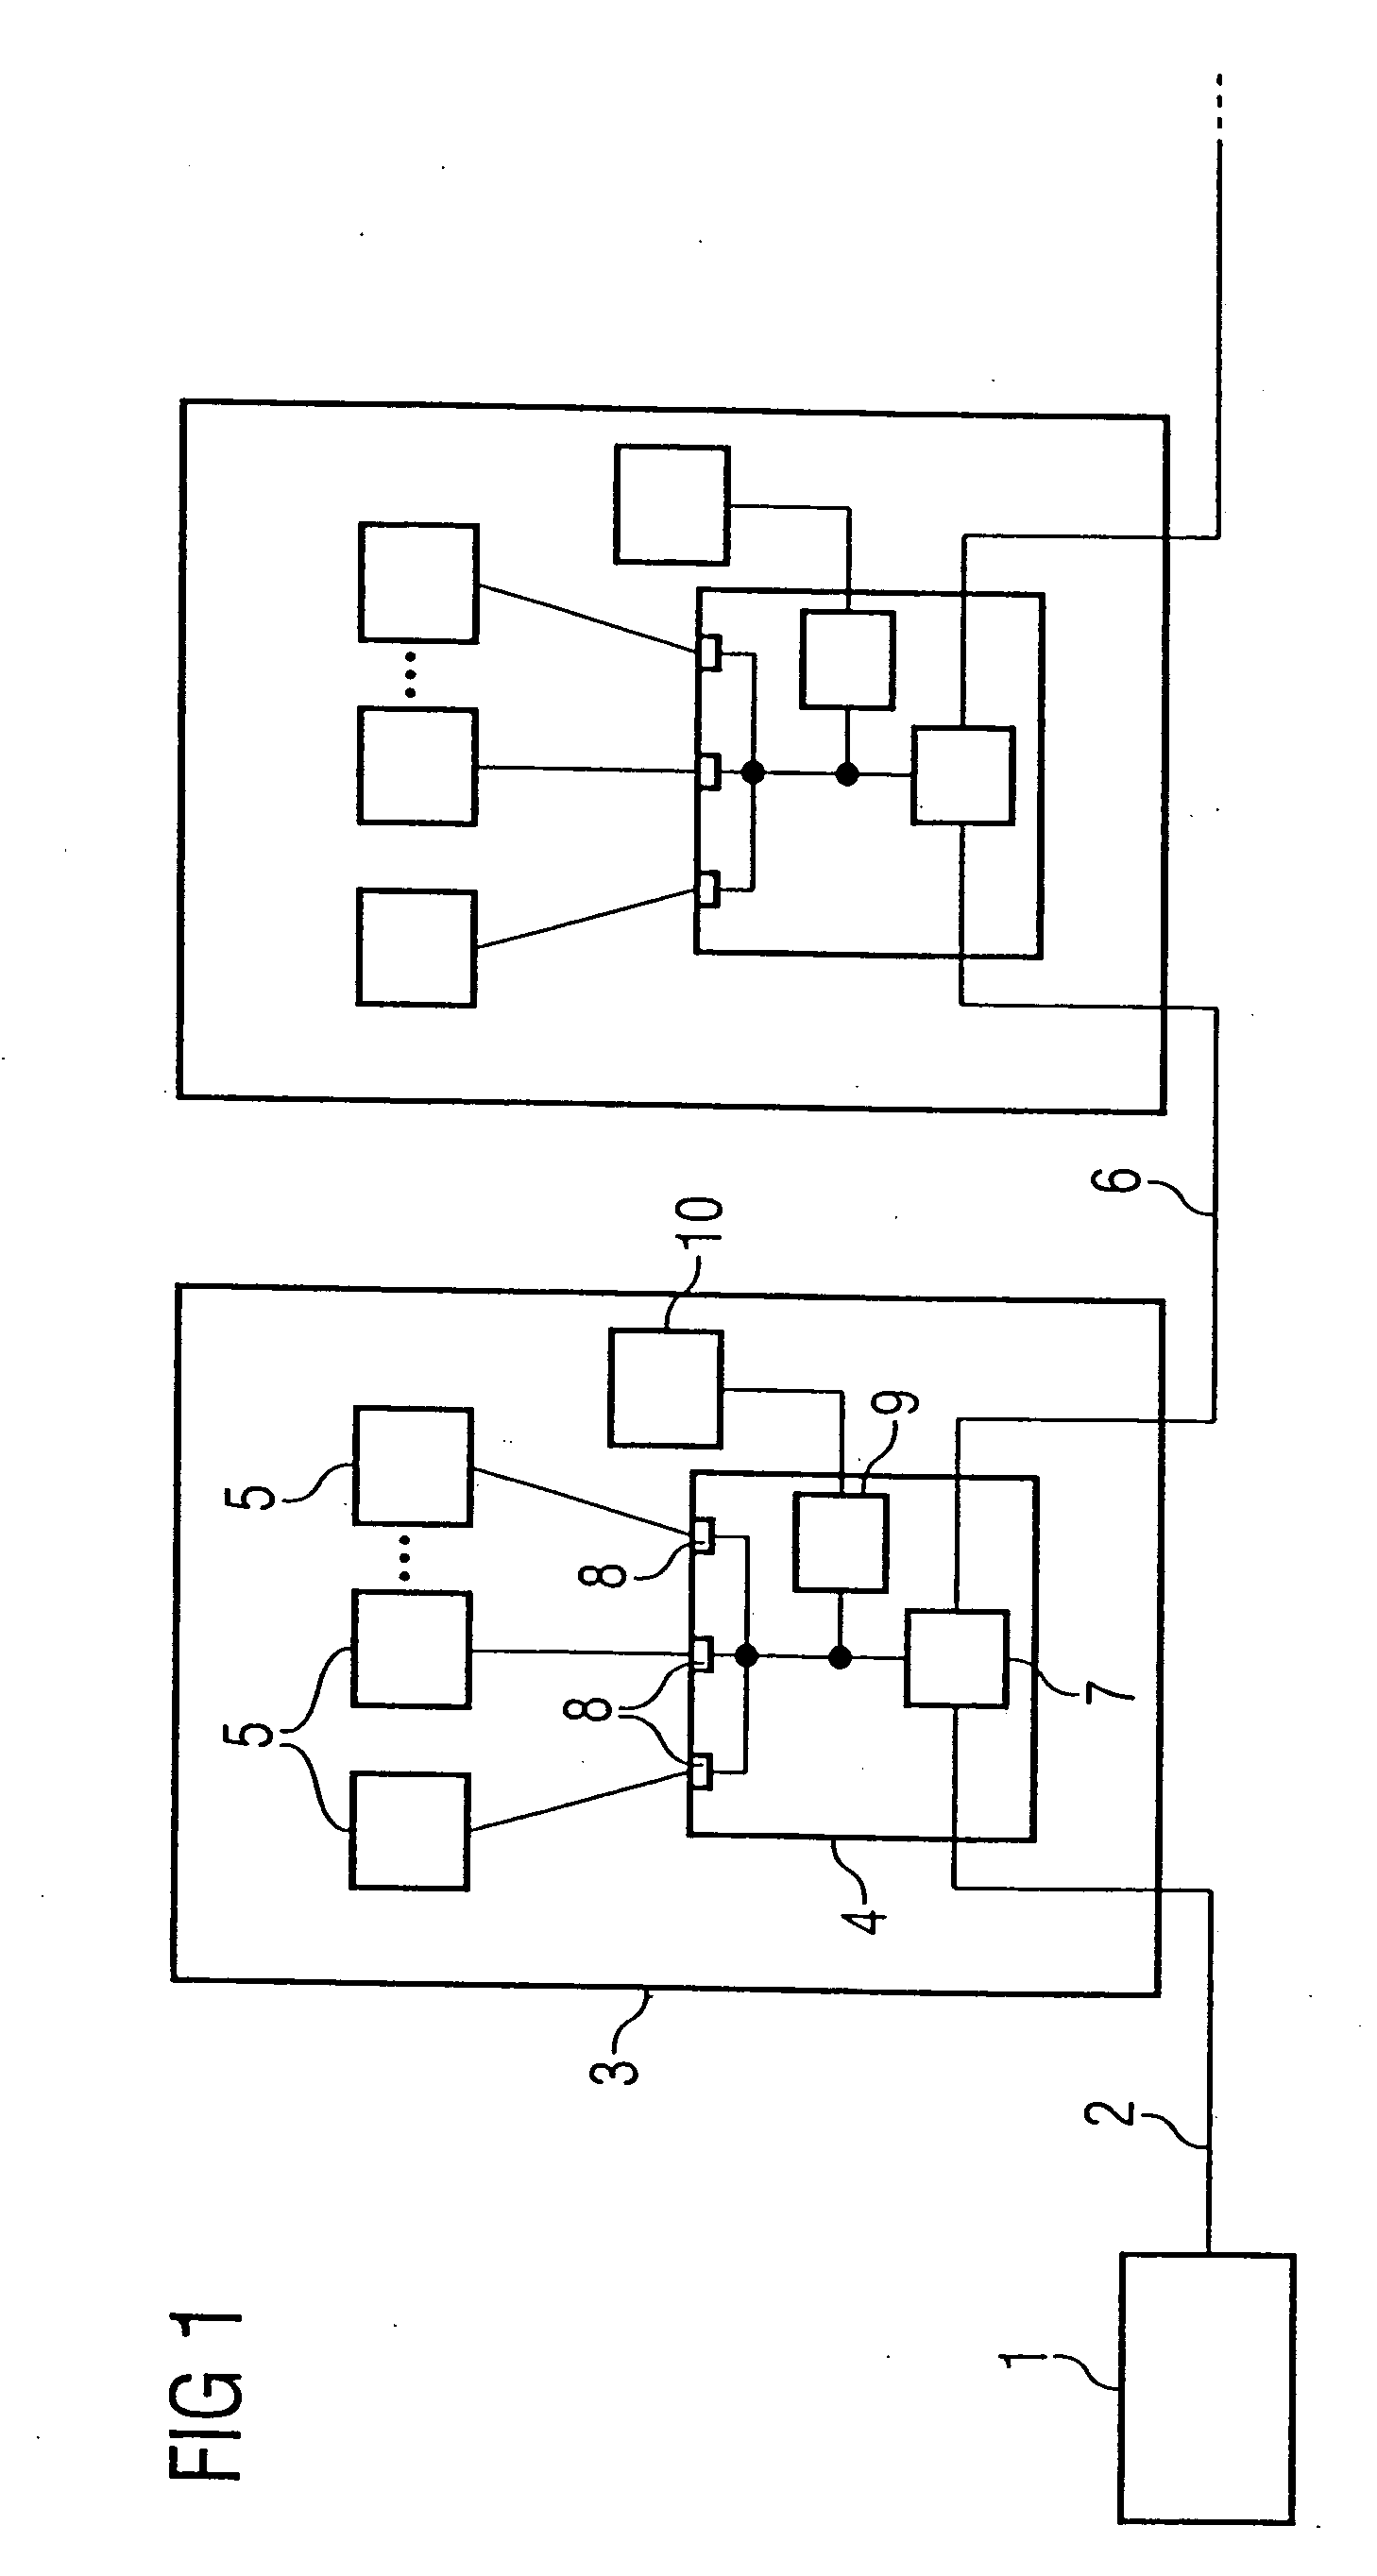 Hub chip for connecting one or more memory chips